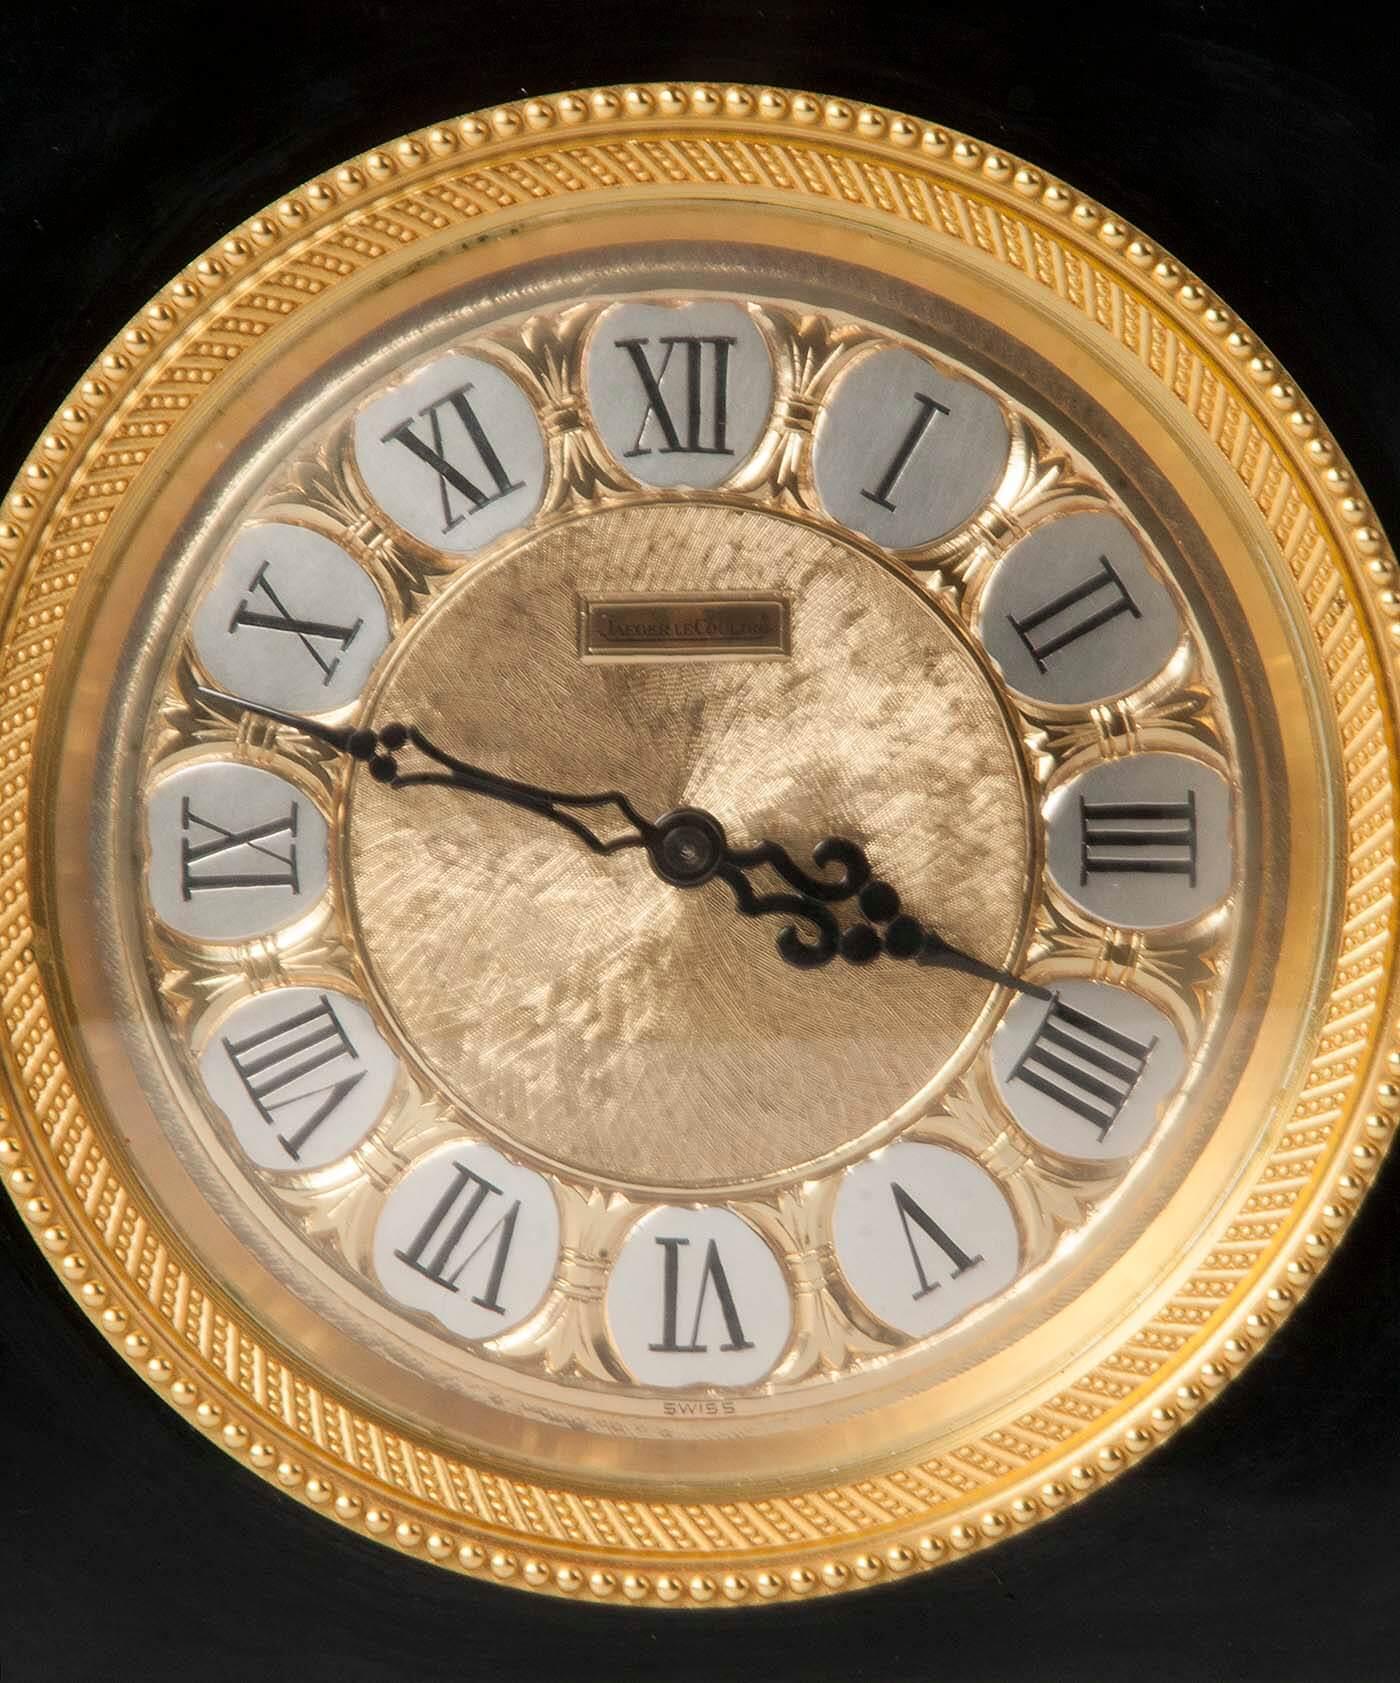 Beautiful and chic clock from the famous Swiss Jaeger LeCoultre. The case is made of black lacquered zinc. Bronze dial with enamel numbers. The outer edge is fire gilt bronze.

The timepiece runs through an escapement system. Also called anchor